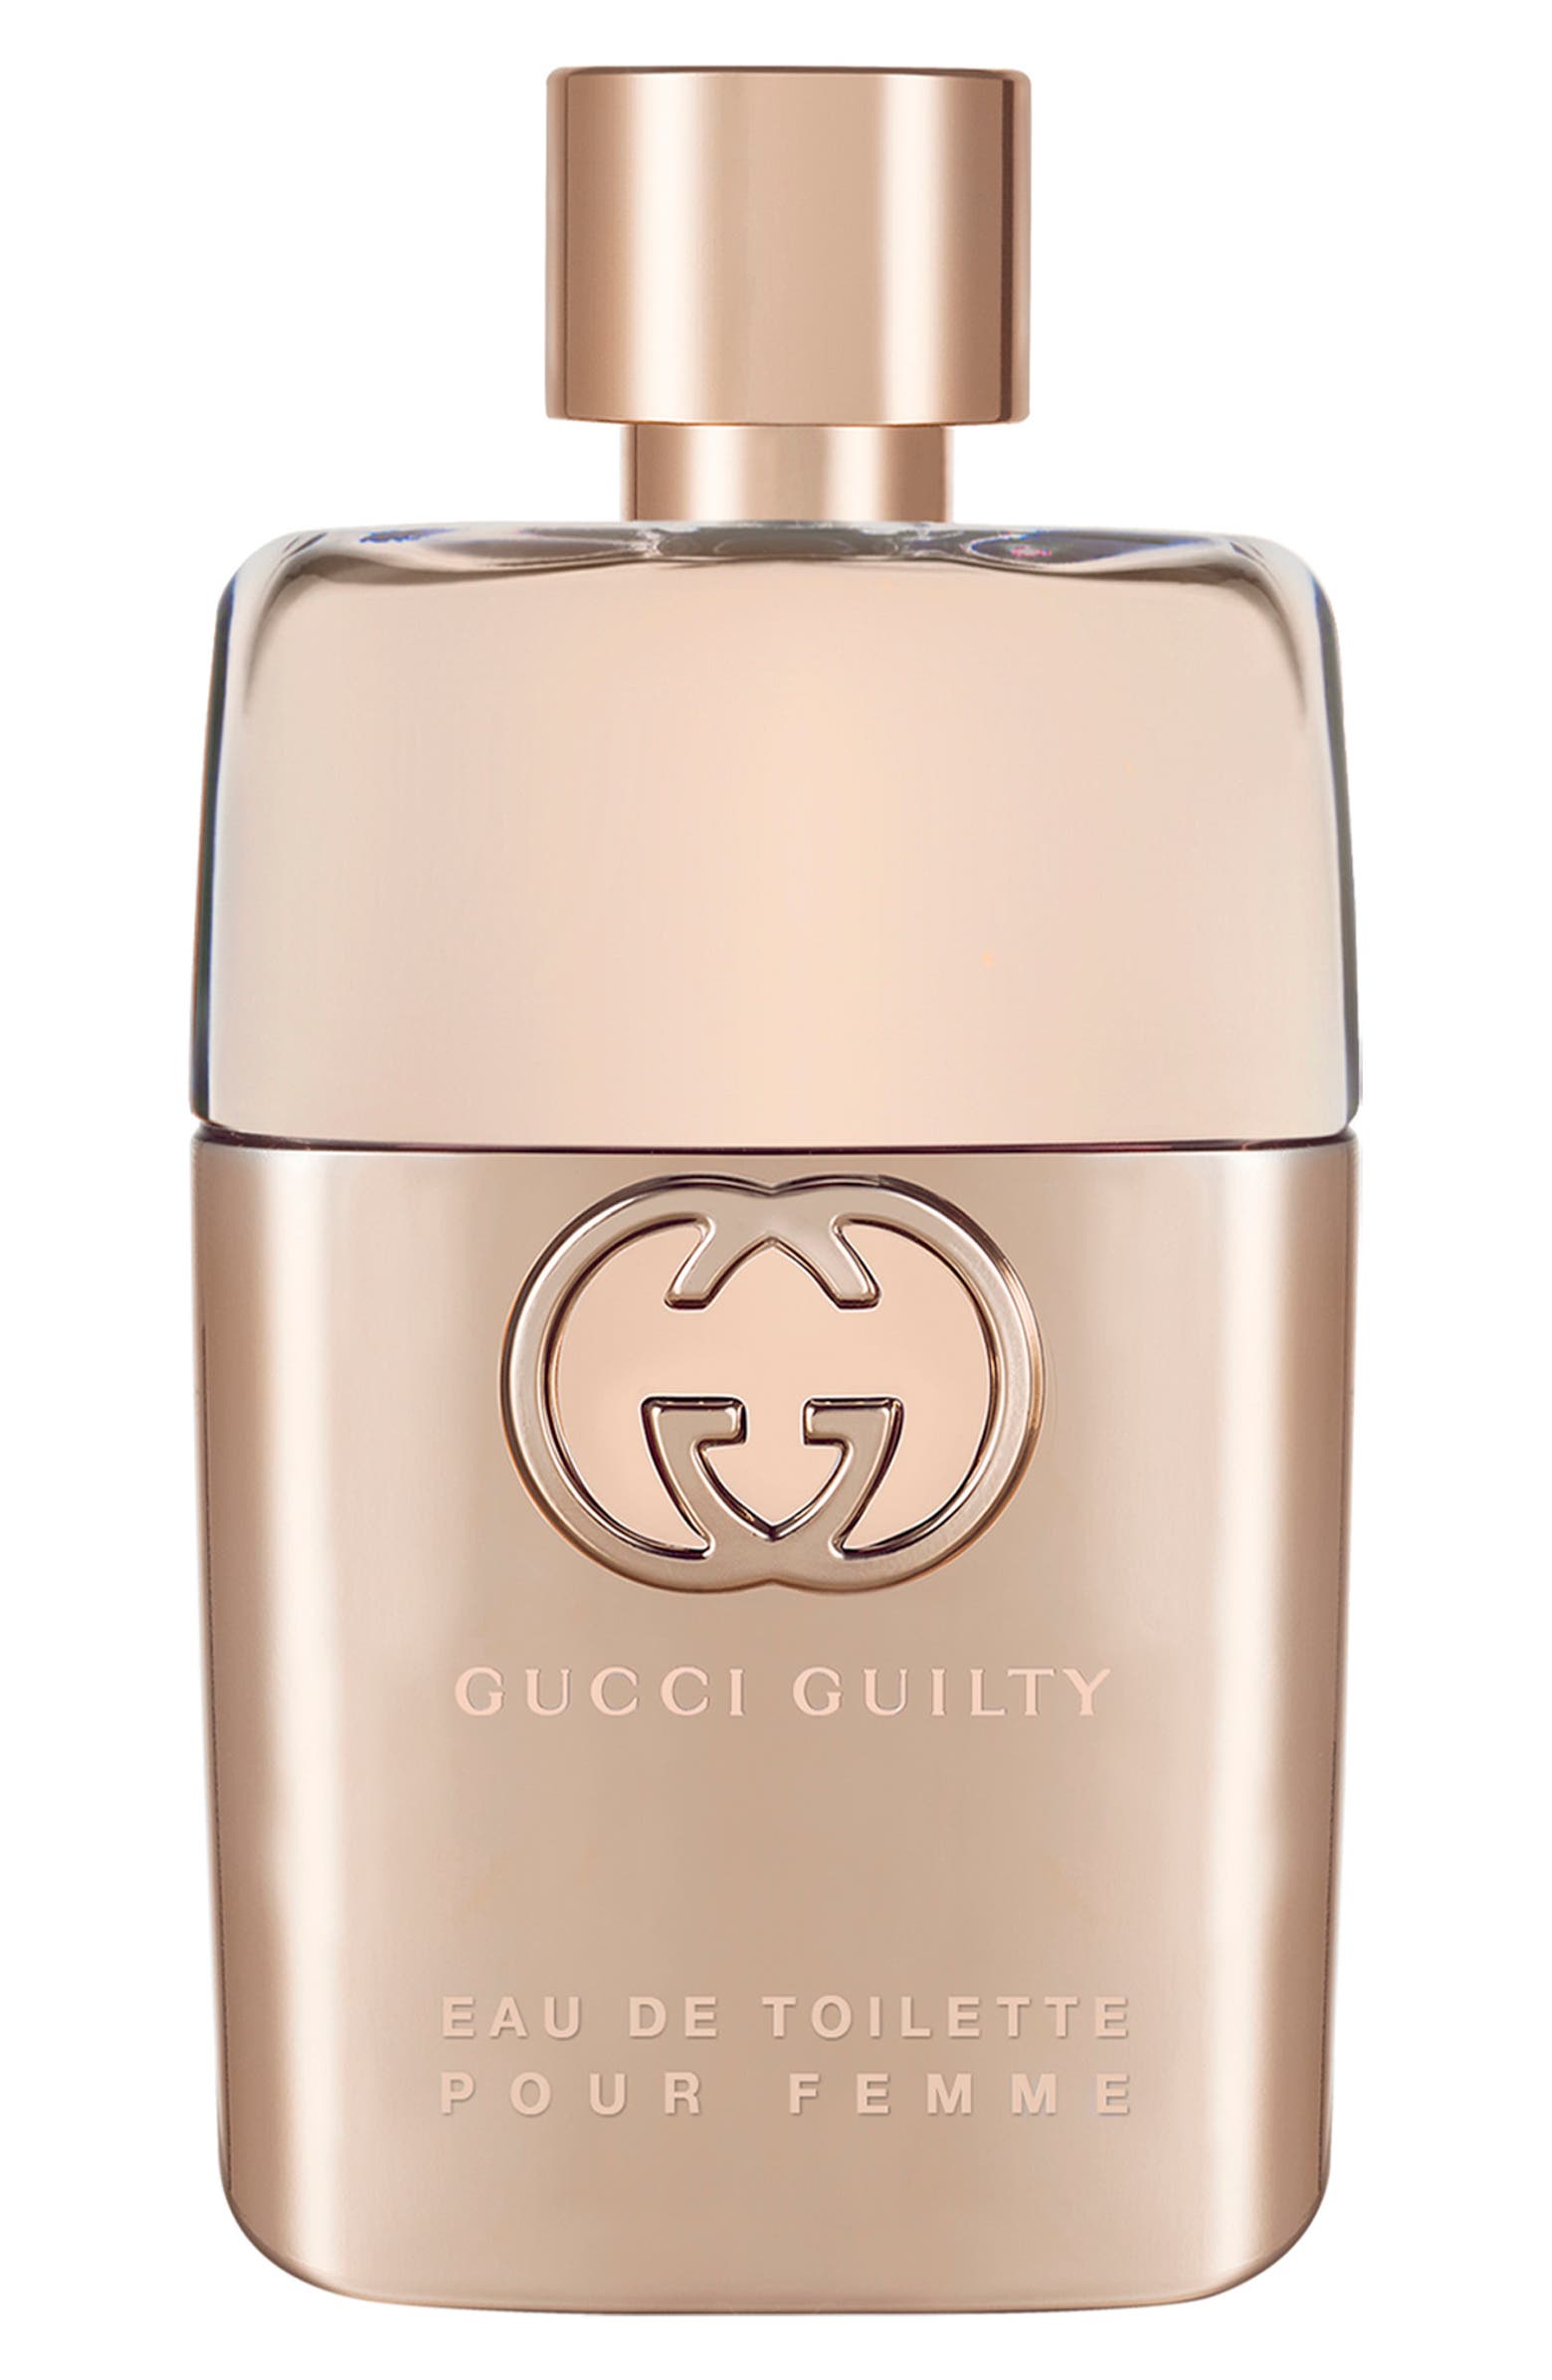 Gucci Guilty for her perfume